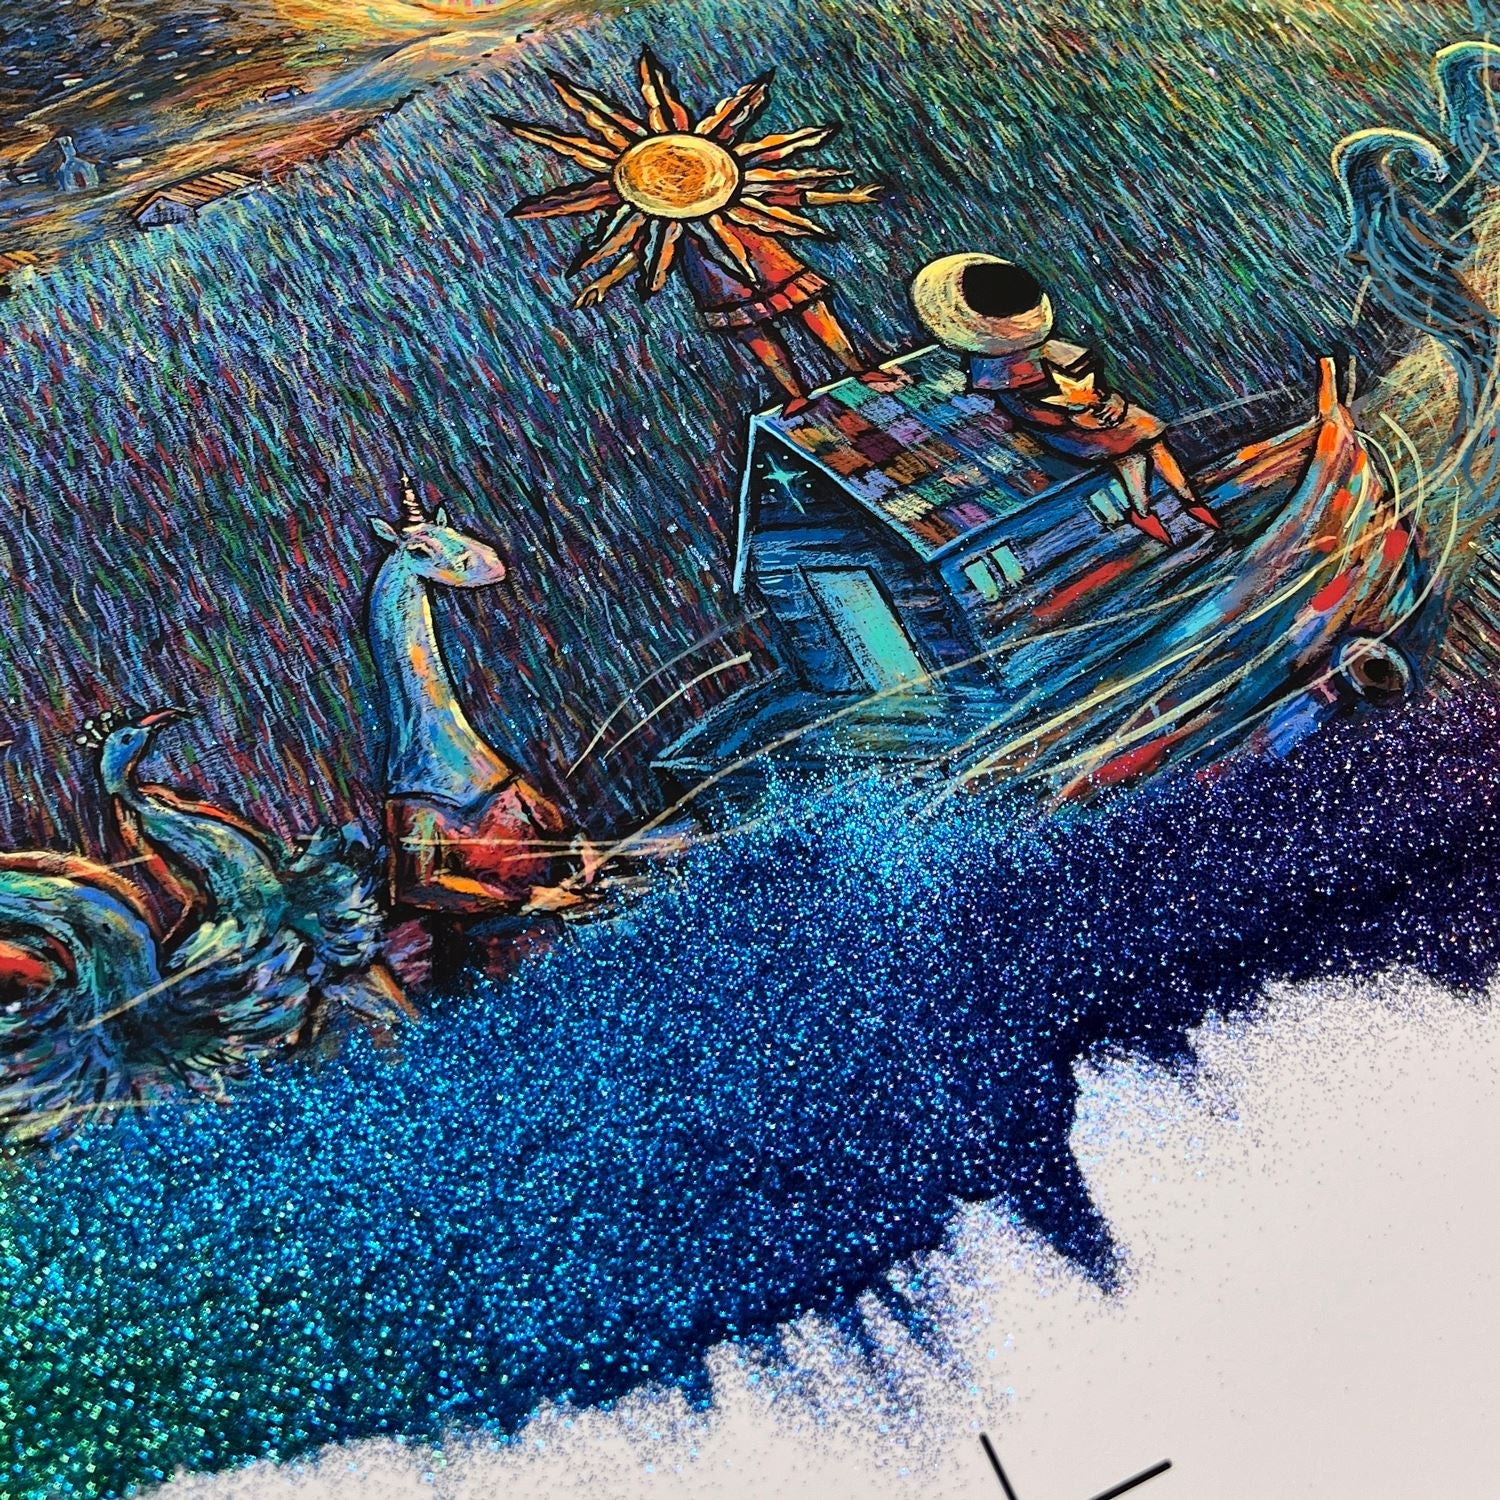 The Parade (Timed Edition) Print James R. Eads 